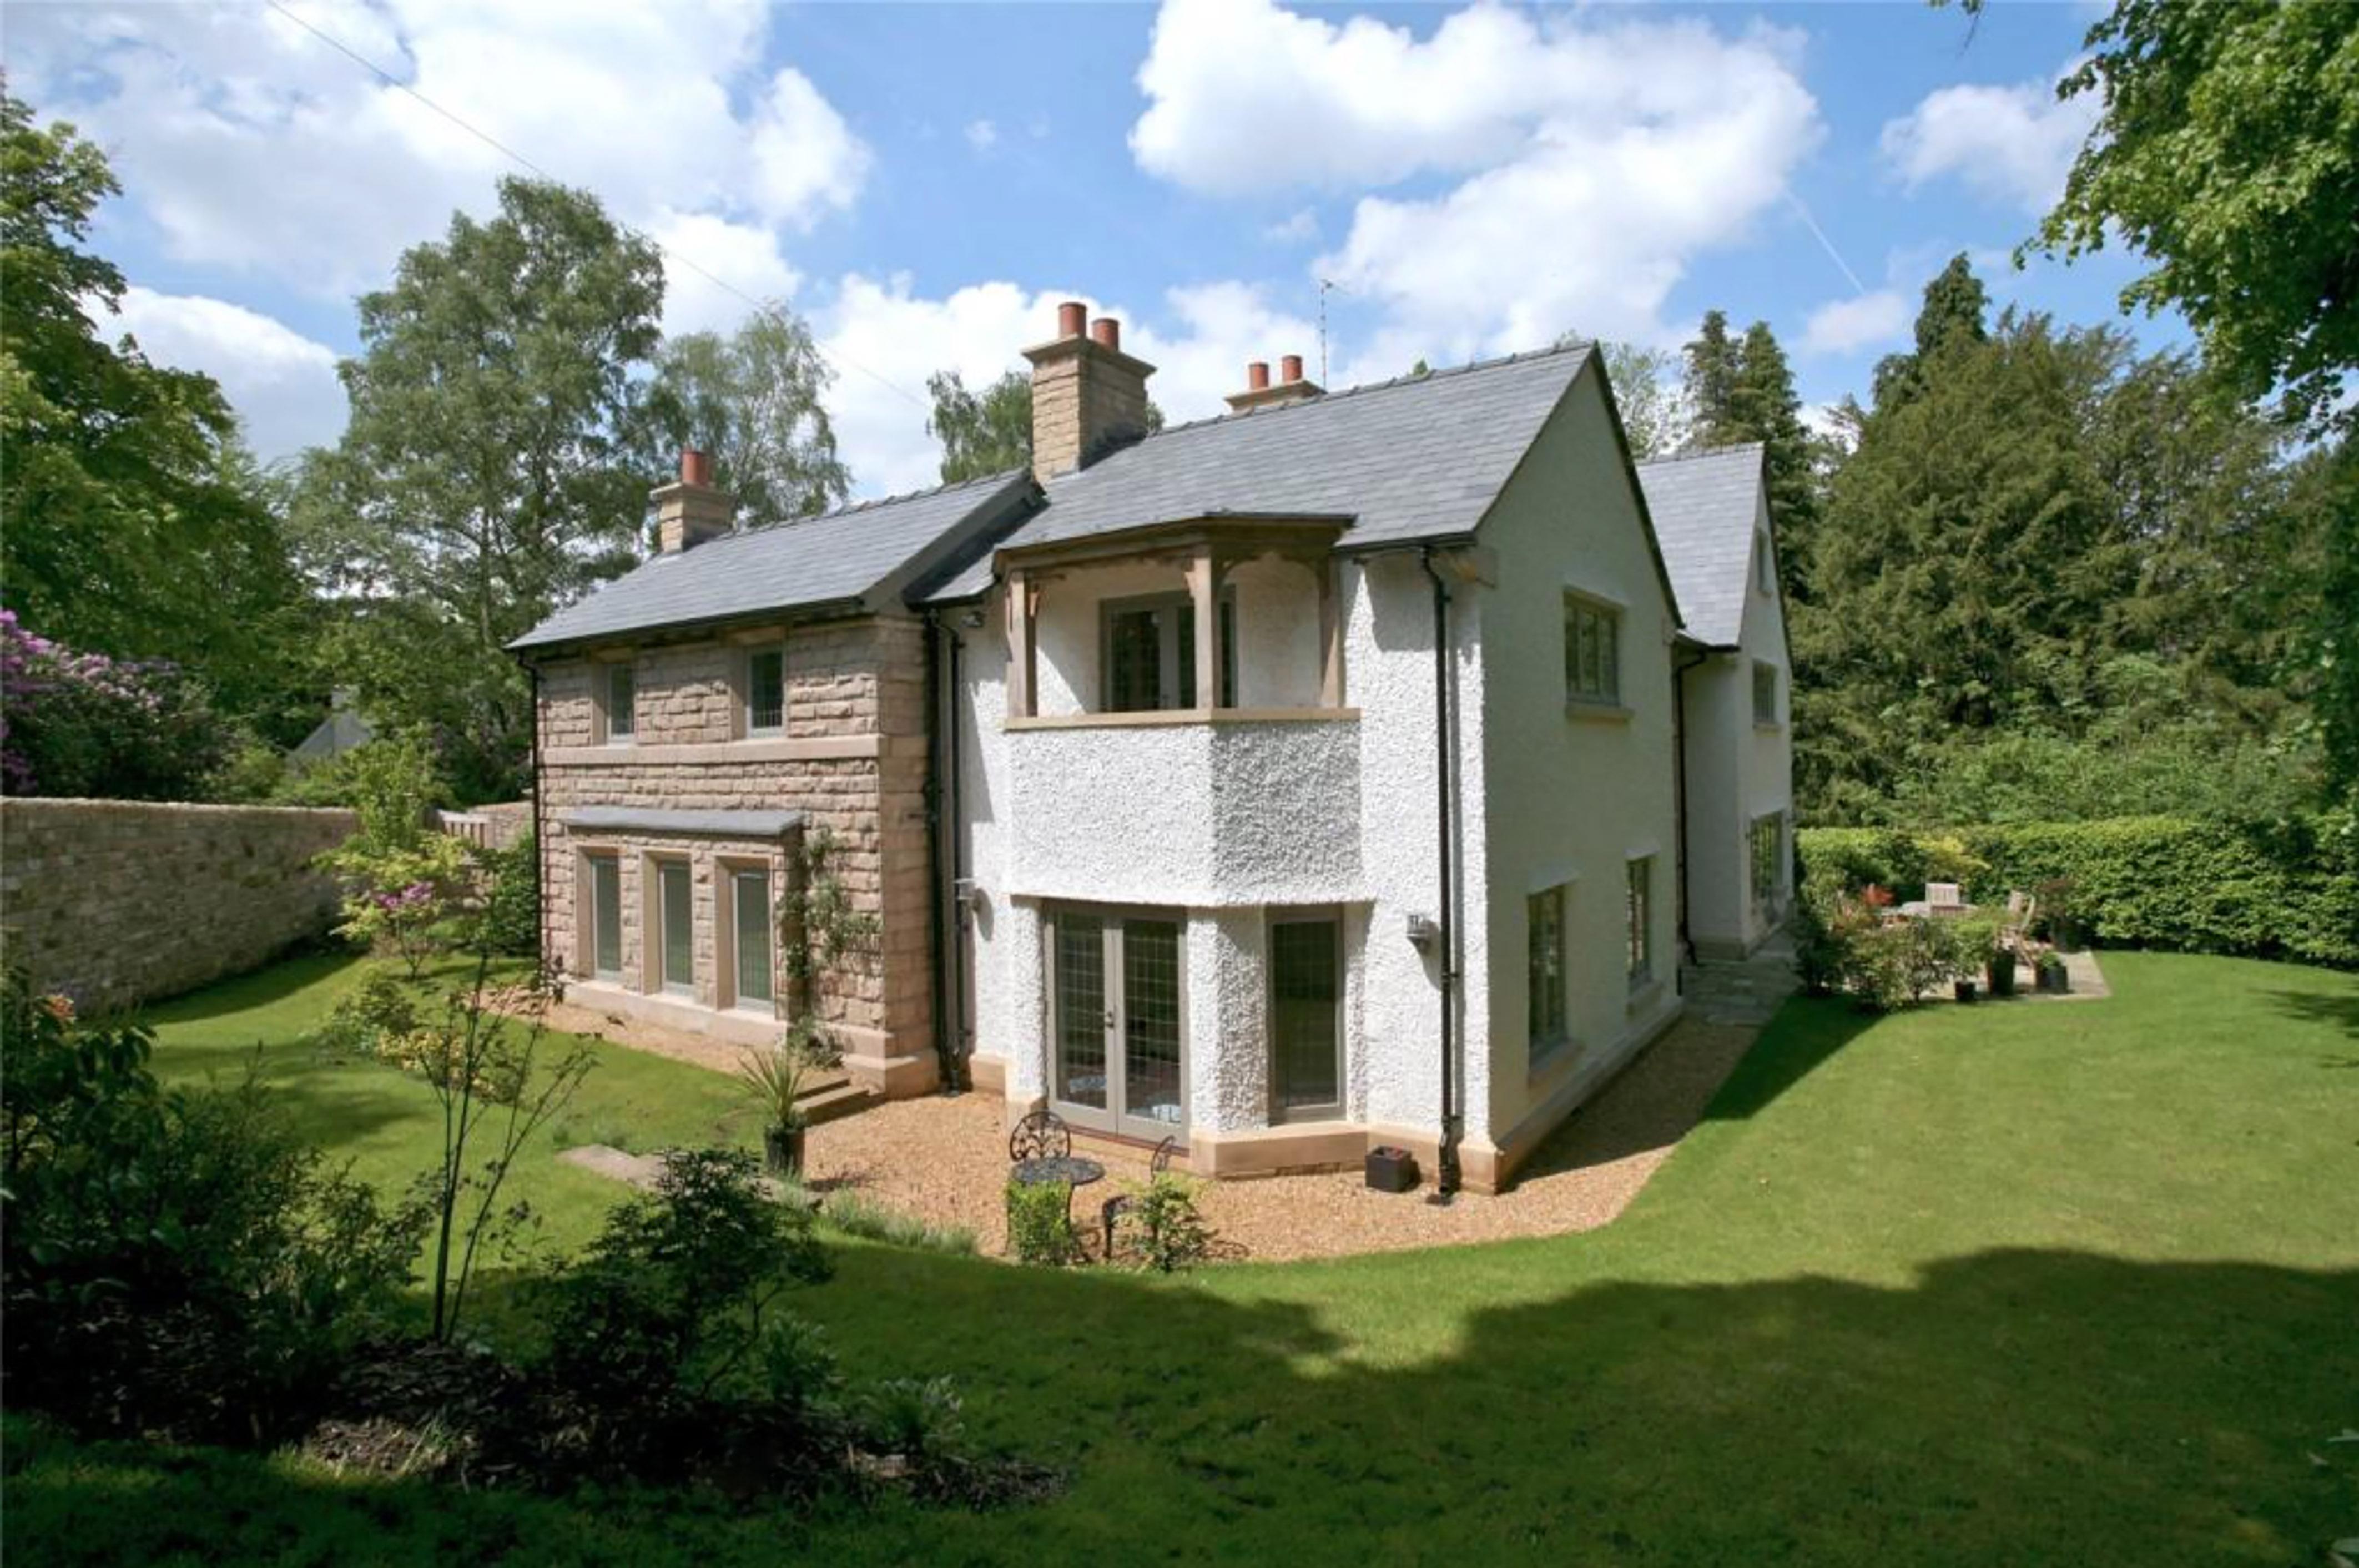  The family home on the outskirts of leafy Wilmslow boasts 'an exceptional bespoke interior nestled in mature gardens'